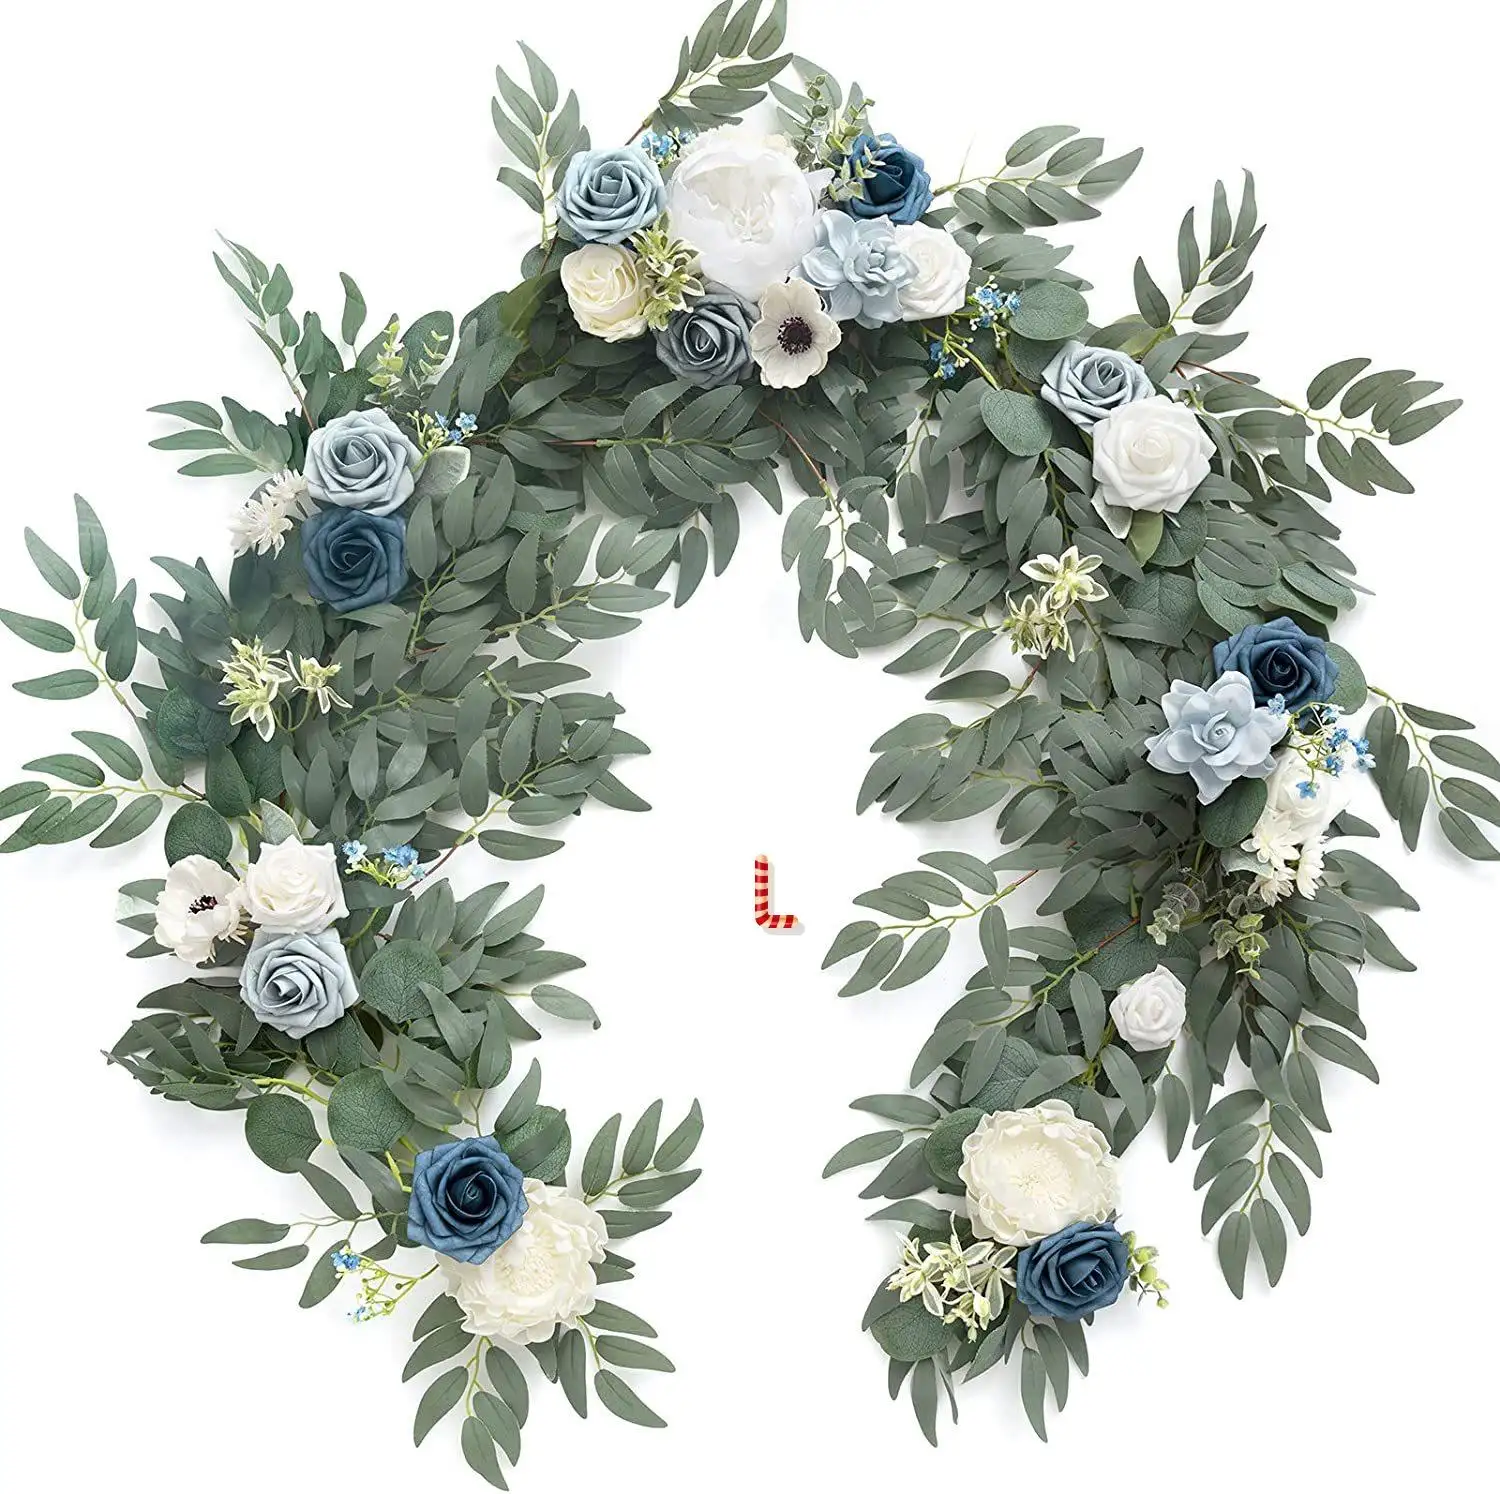 Blue Flower Vines Artificial Wisteria Rose Hanging Plants Garland Flowers Greenery Decorative Wall For Wedding Arch Door